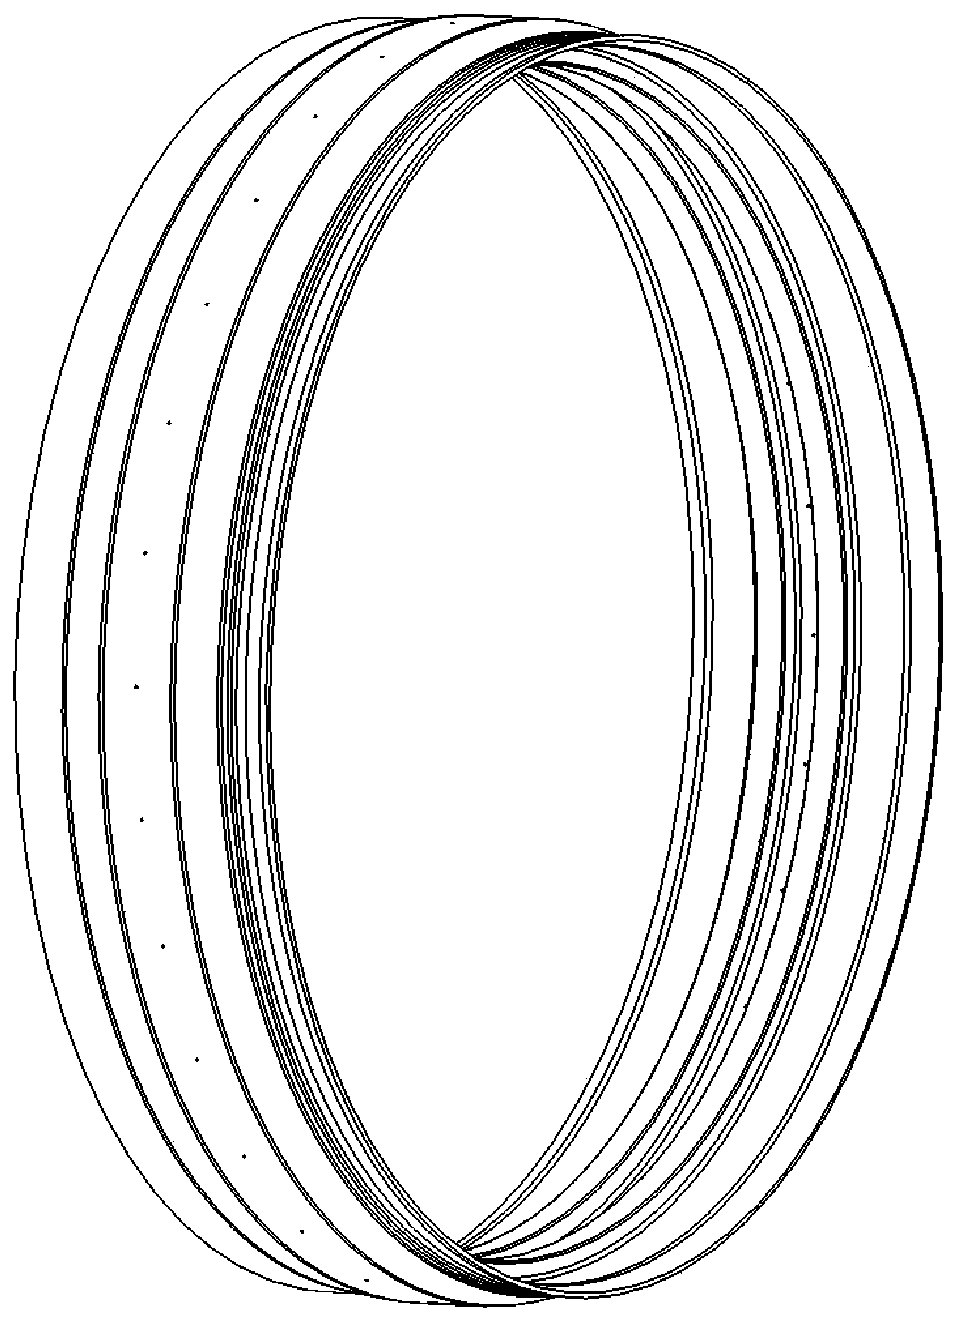 Combined-type cooling seal structure for high-pressure turbine rotor exterior ring